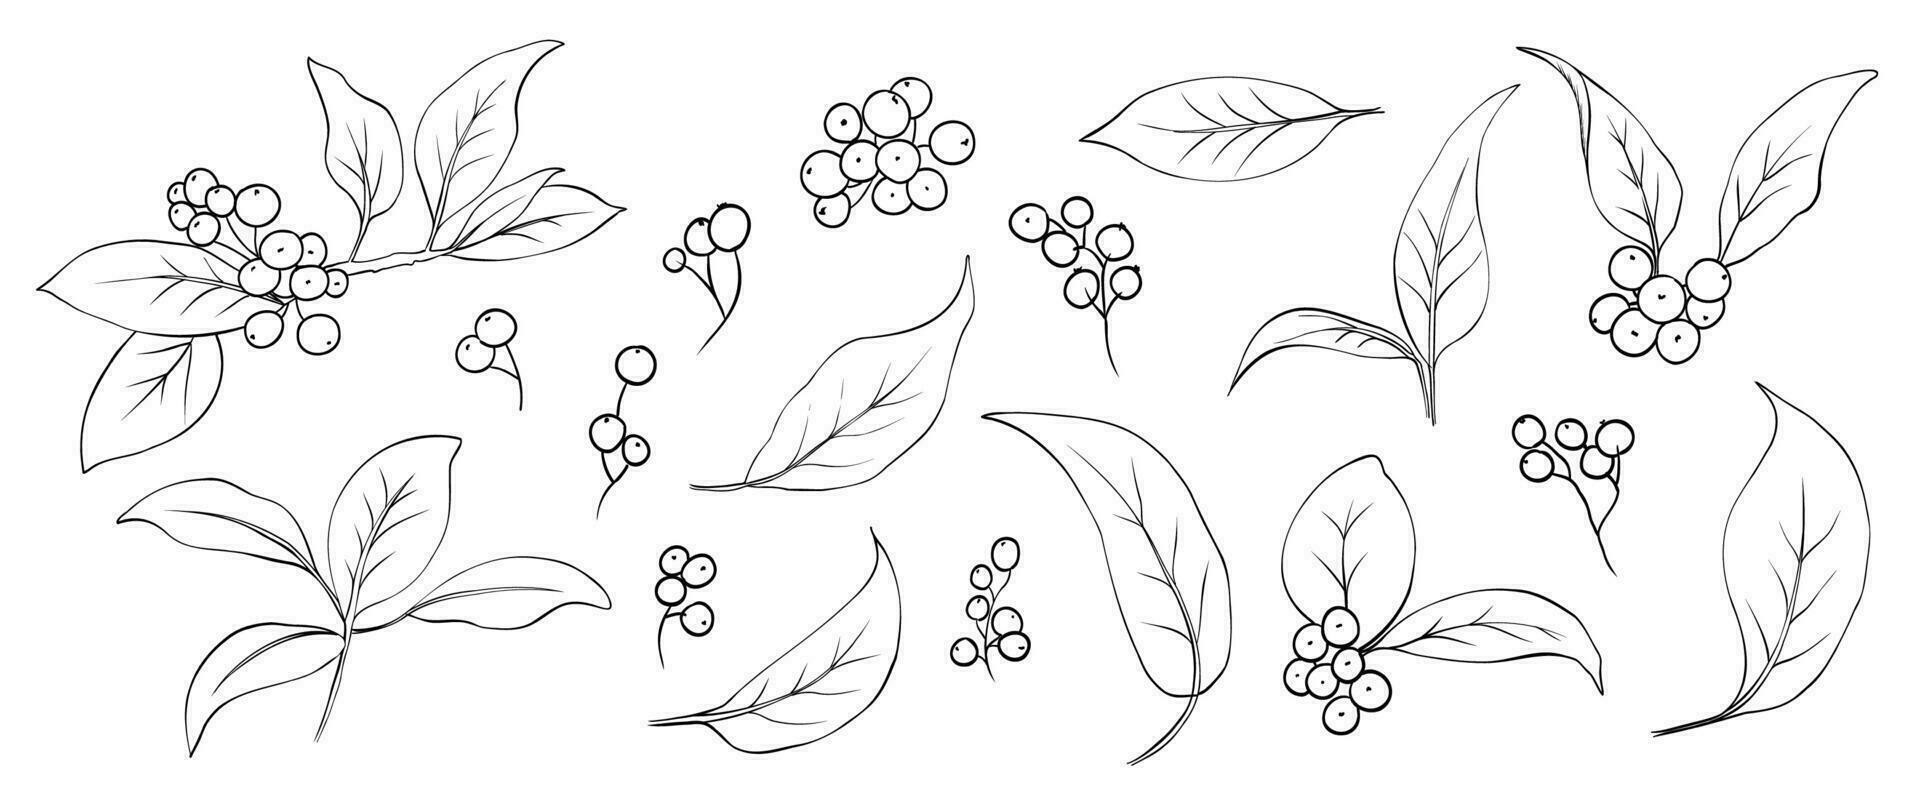 Set of Christmas berries drawn with lines elements vector